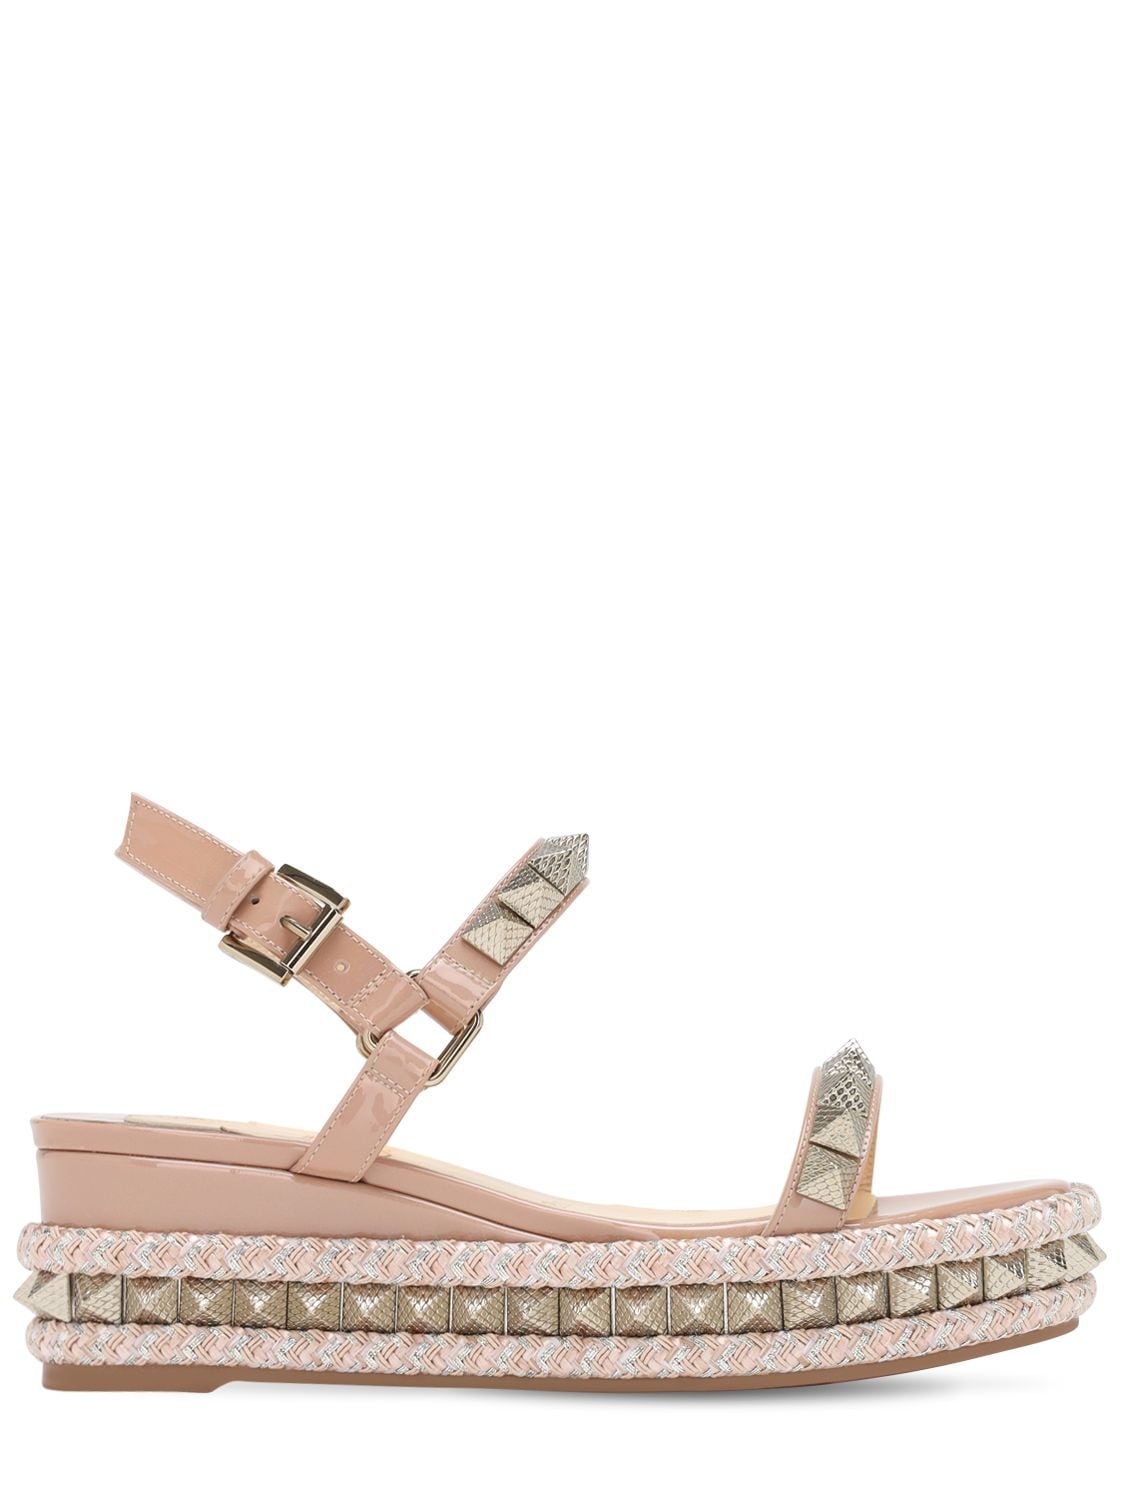 Christian Louboutin 60mm Embellished Patent Leather Wedges In Blush,gold